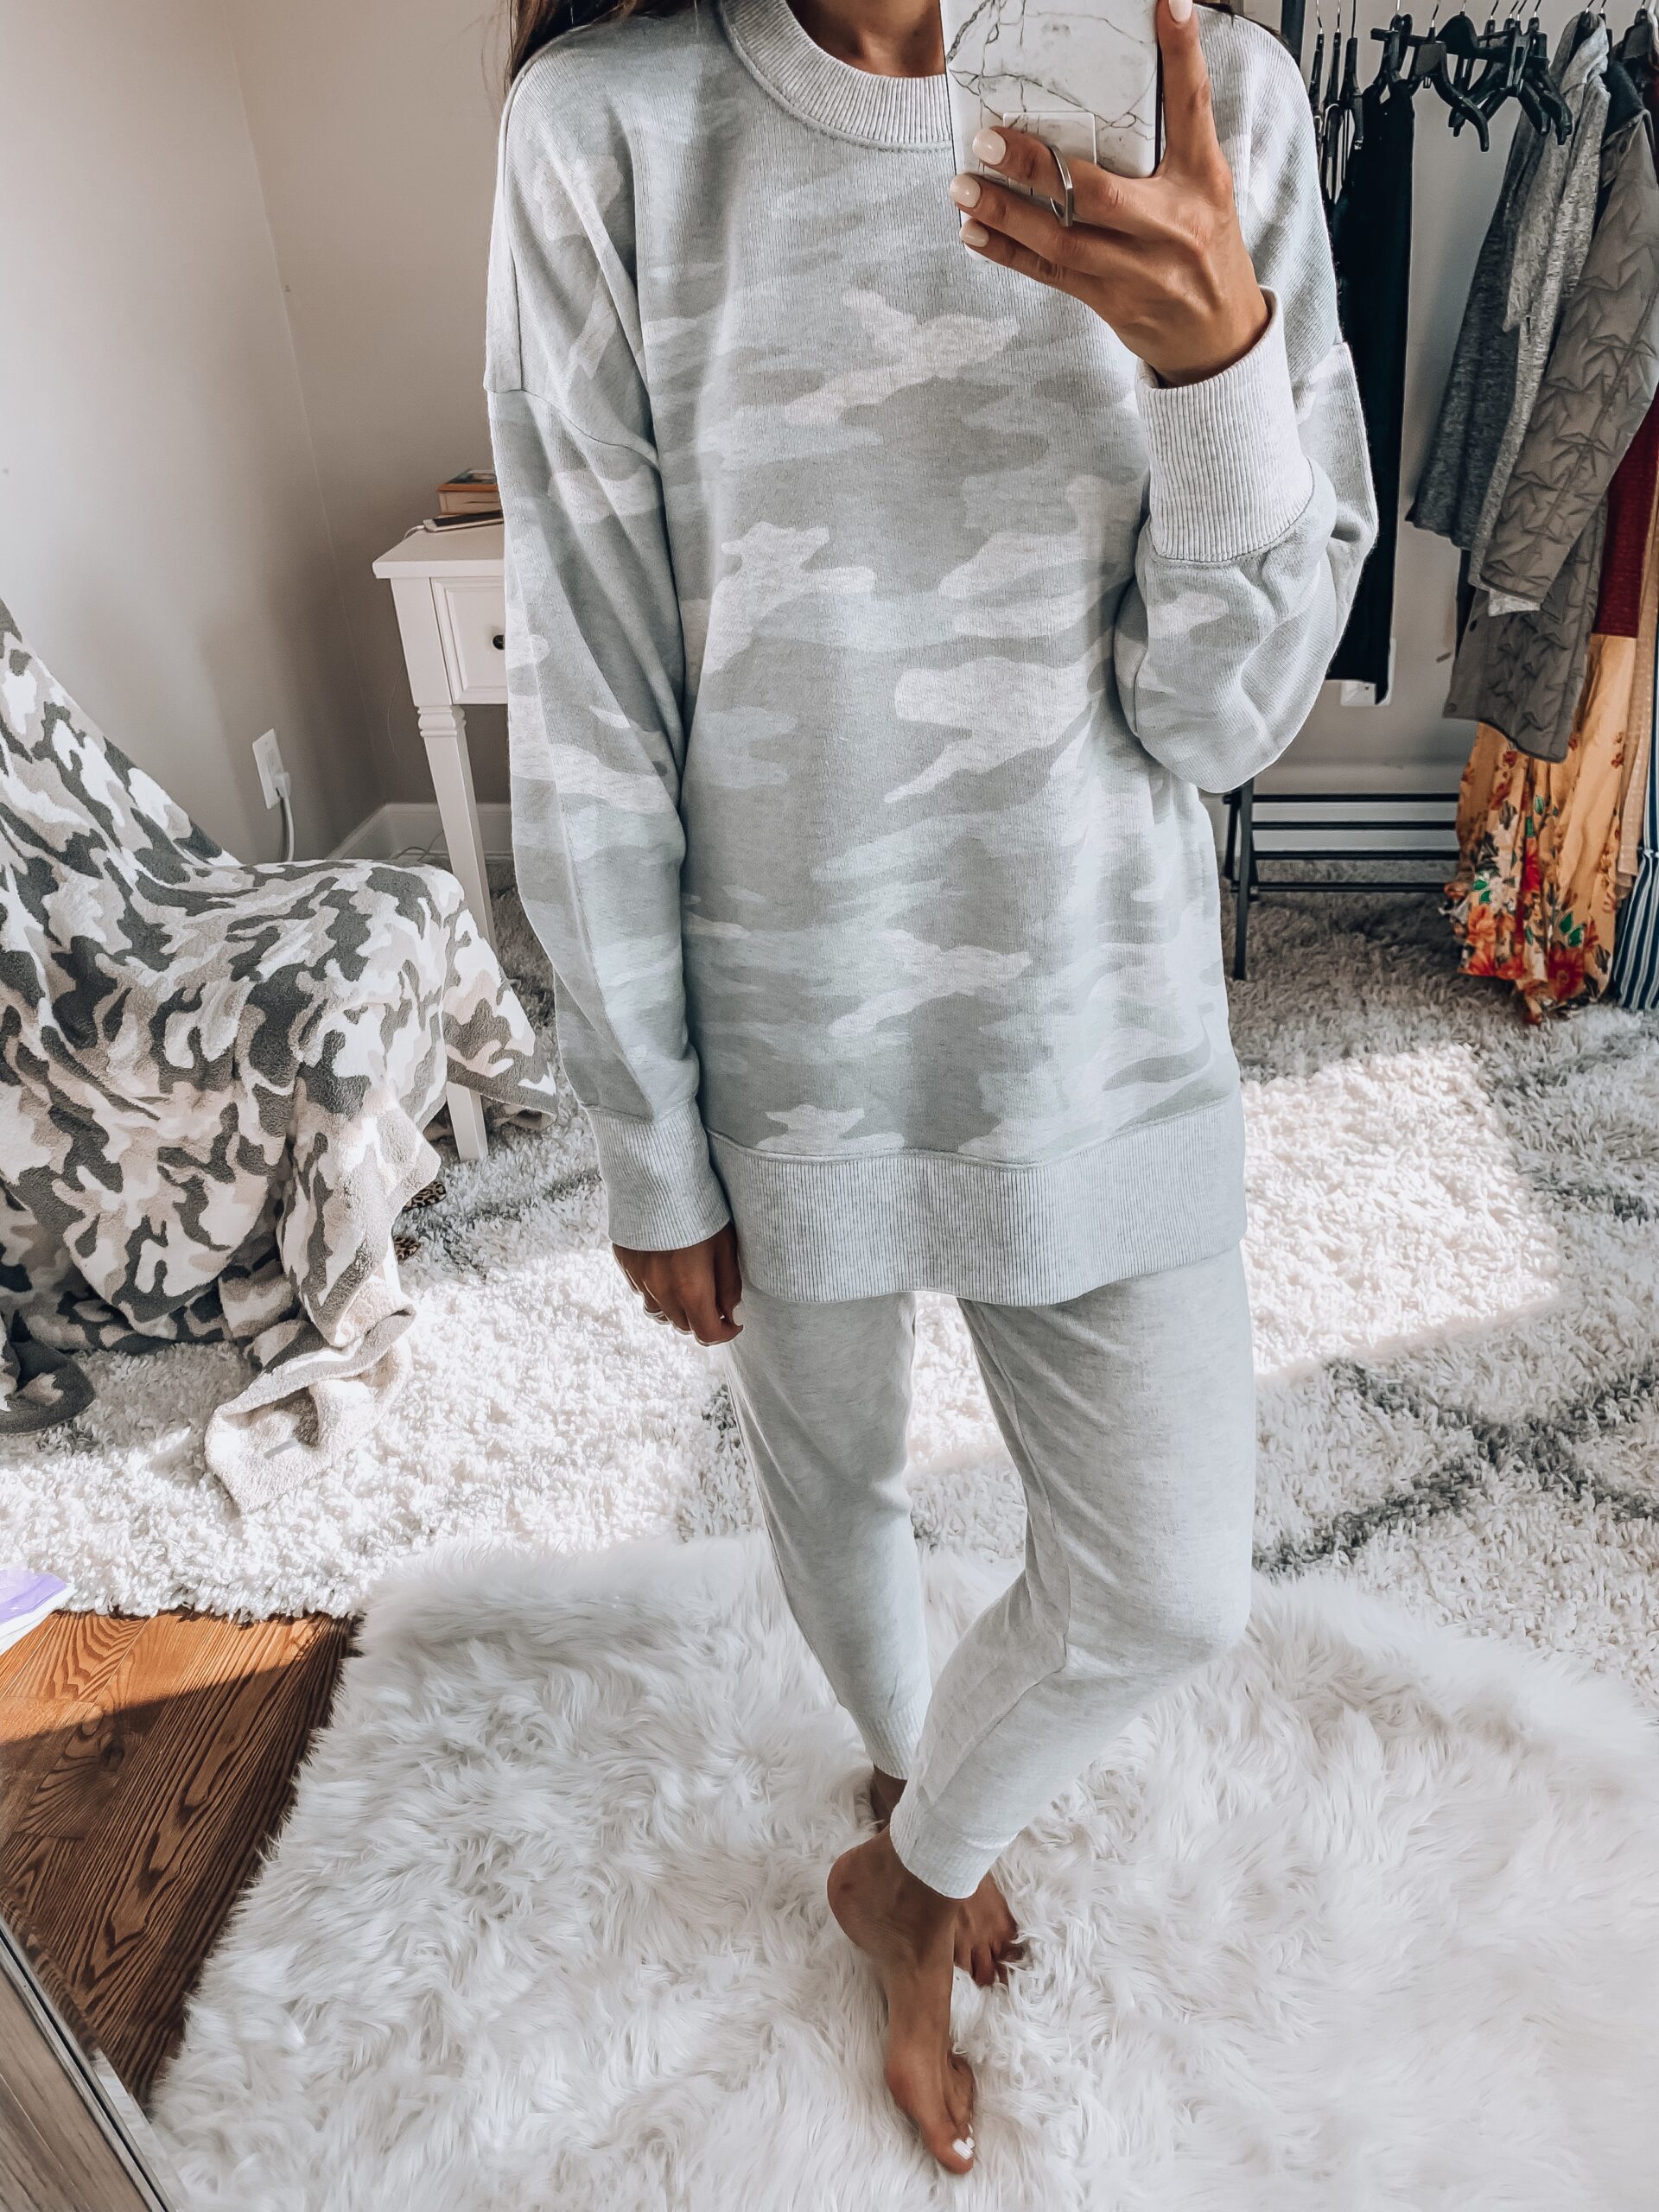 American Eagle And Aerie Try-On 7.26 - Blushing Rose Style Blog